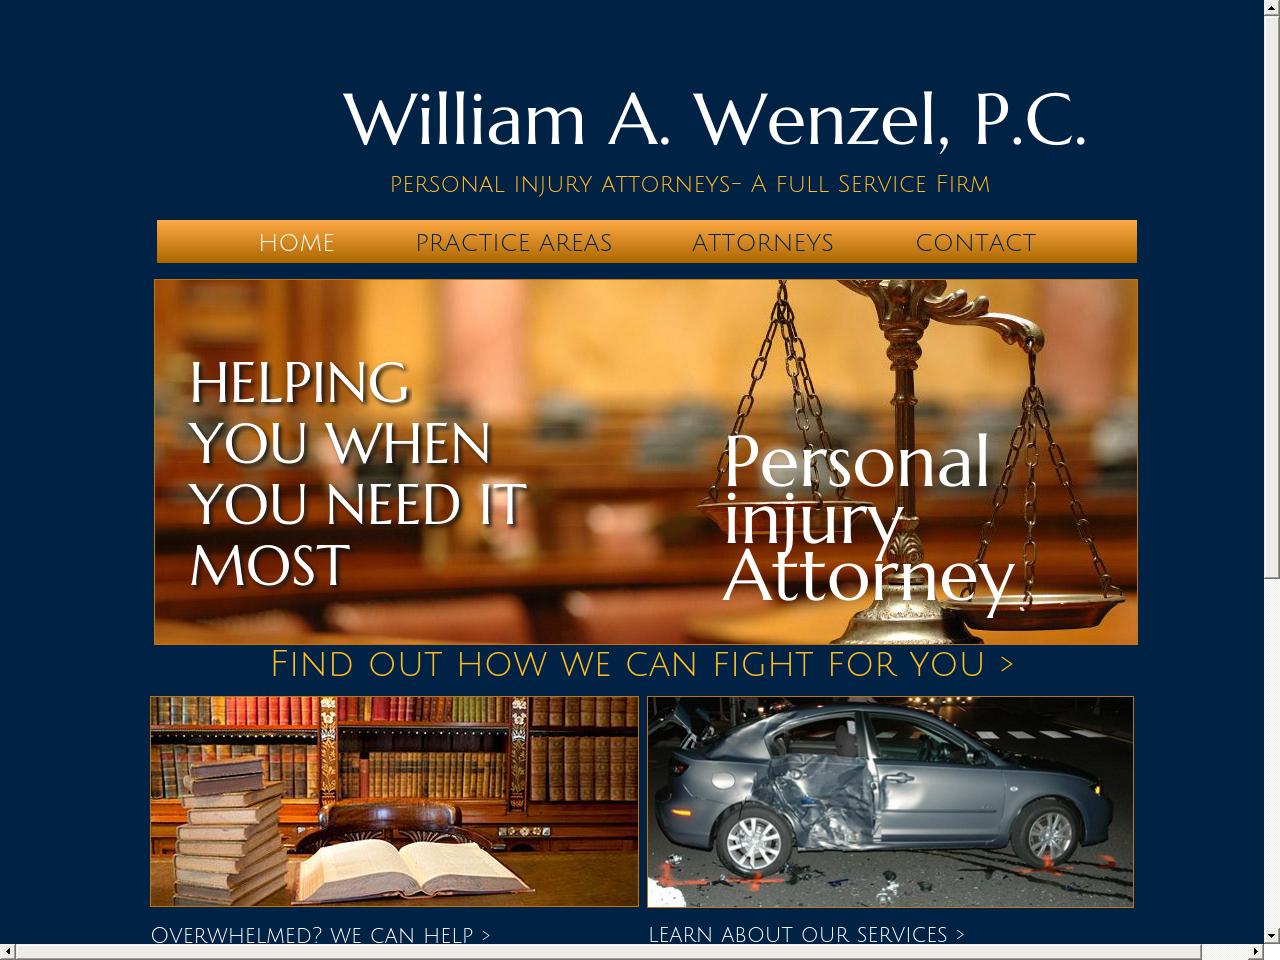 The Law Office of William A. Wenzel - Brielle NJ Lawyers